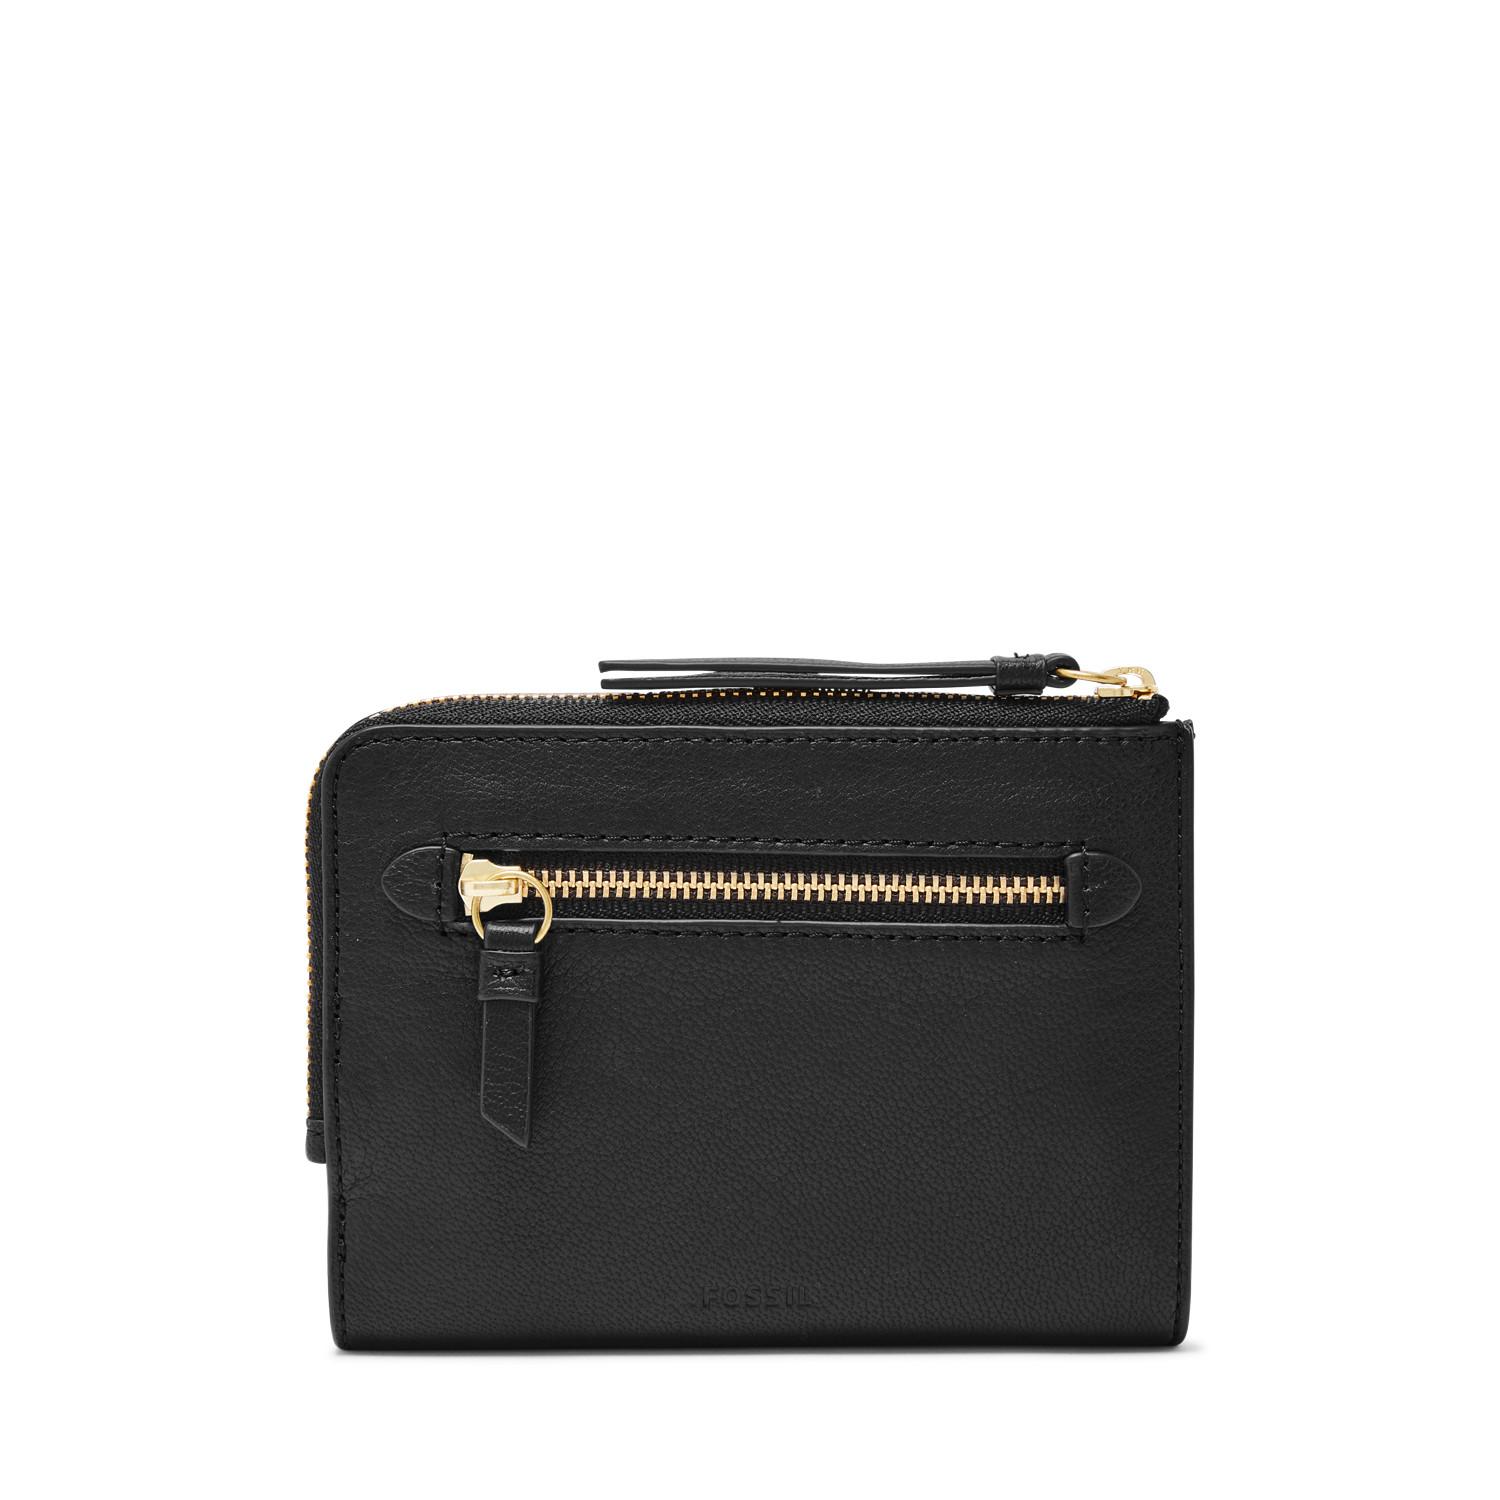 Fossil Fiona Leather Multifunction Wallet in Black/Gold (Black) - Lyst